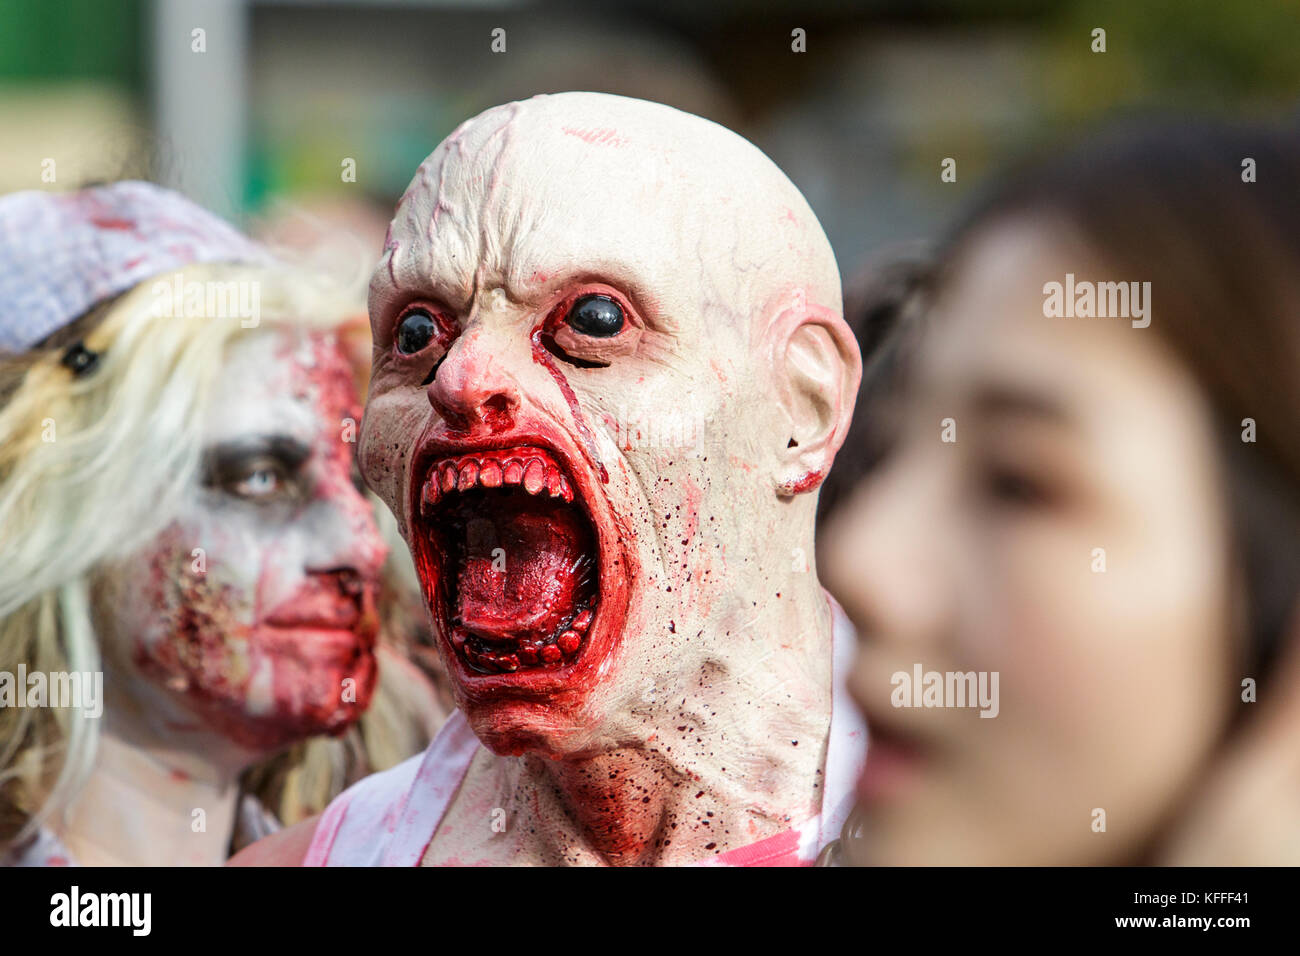 Bristol, UK. 28th Oct, 2017. People dressed as zombies are pictured as they participate in a zombie walk through the city centre. Stock Photo